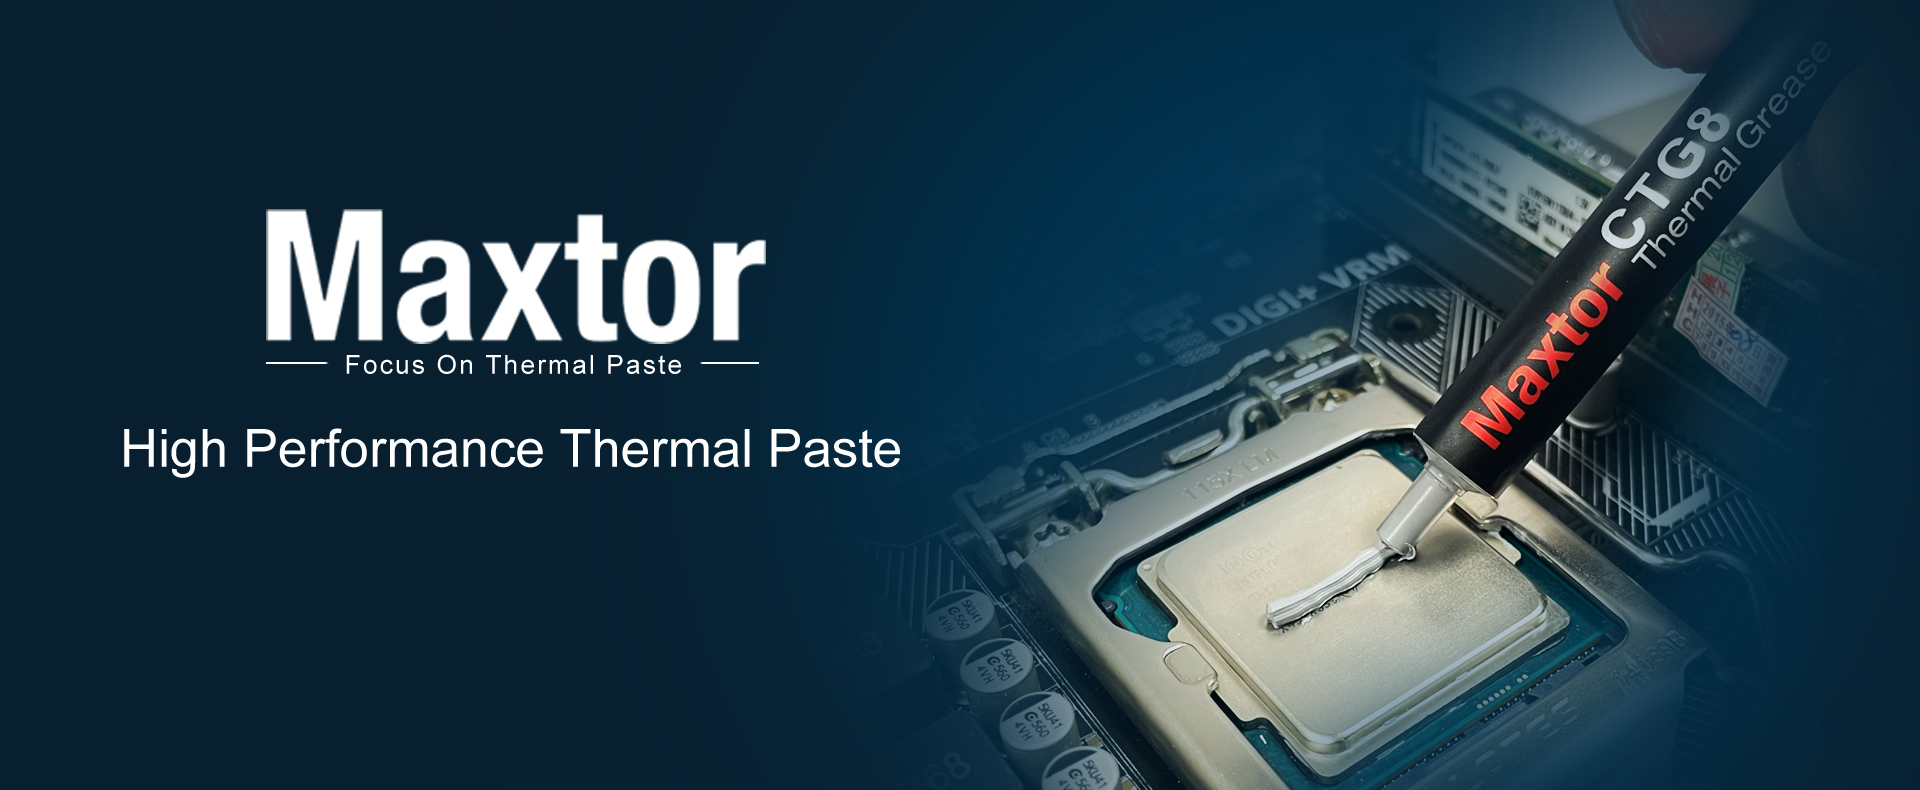 Maxtor thermal paste